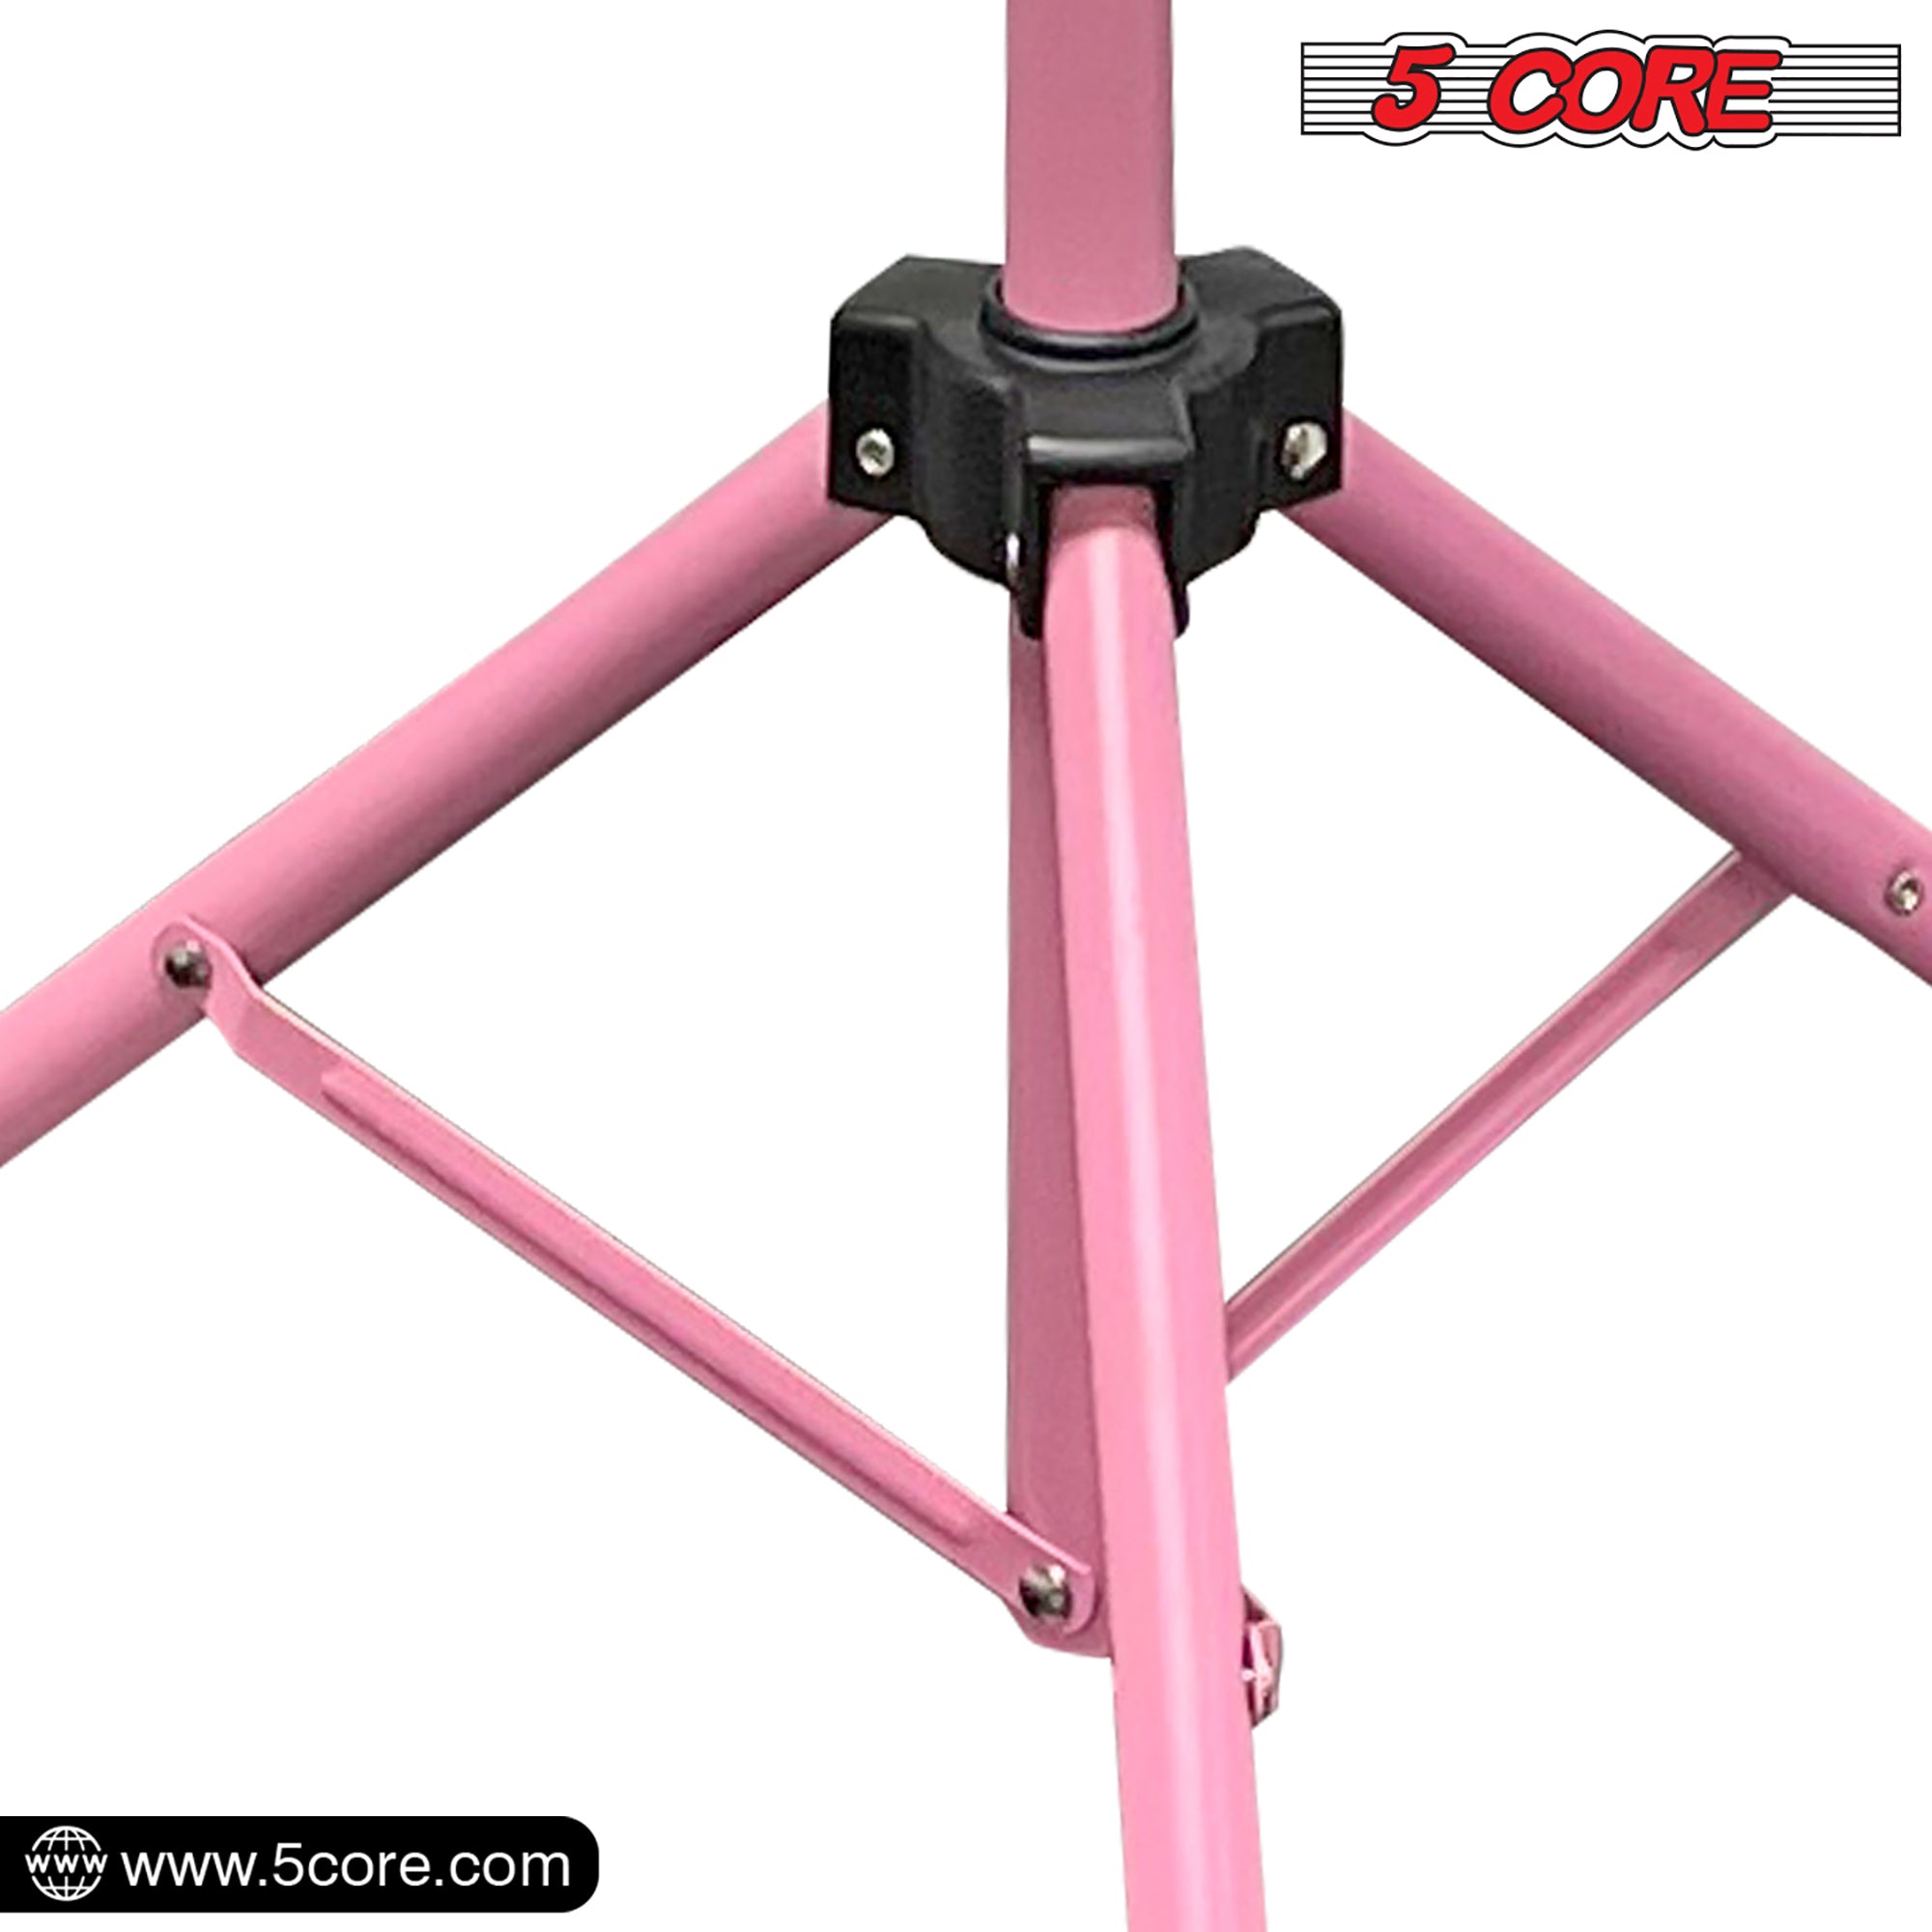 5 Core Music Stand for Sheet Music Pink Folding Portable Stands Light Weight Book Clip Holder Music Accessories - MUS PNK